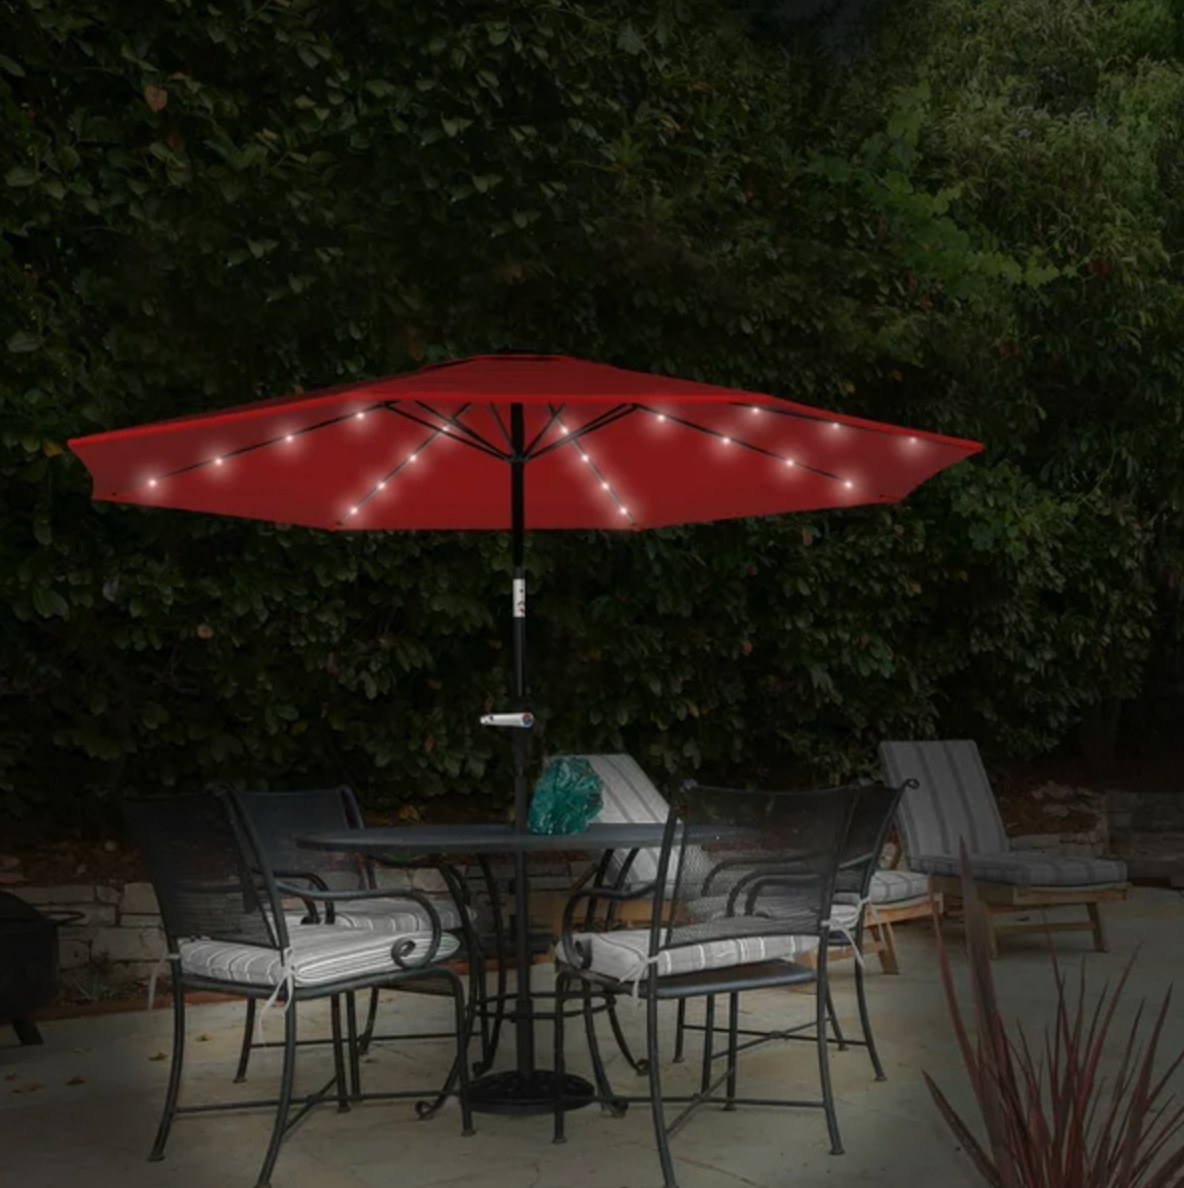 the red umbrella with lights on the underside over a dining table on a patio